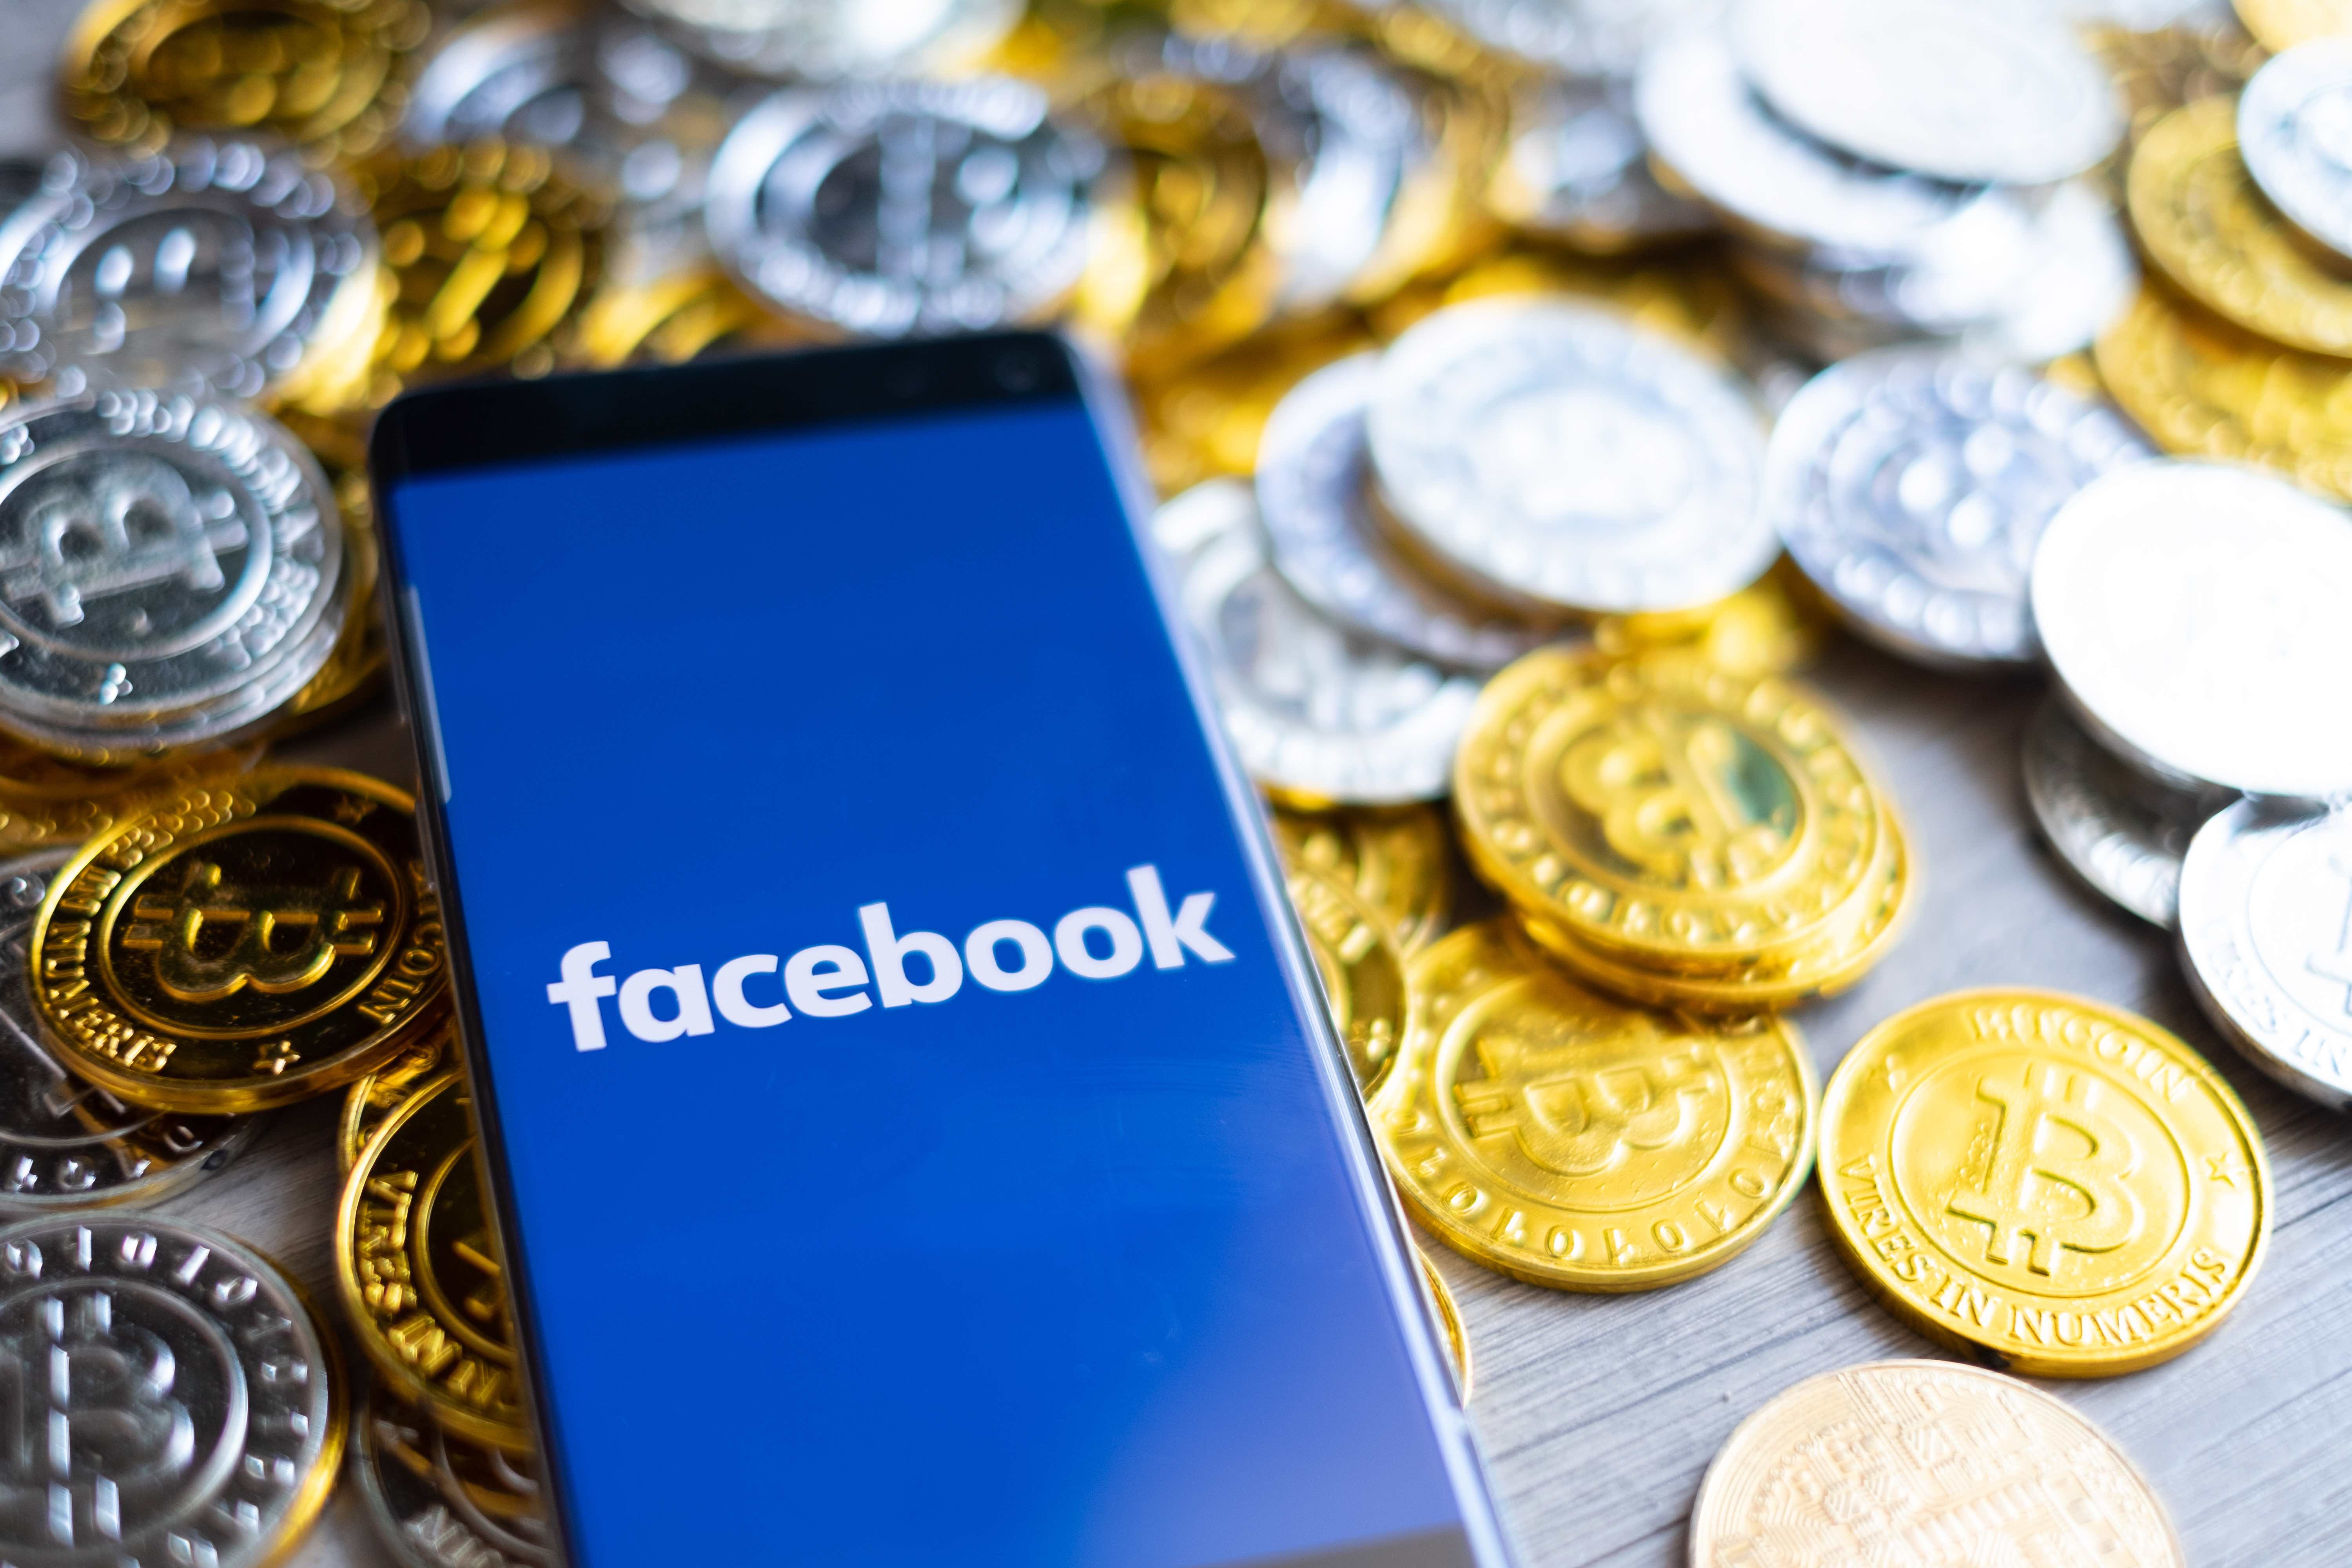 Facebook’s Libra Project Launches Bug Bounty With $10,000 Max Reward